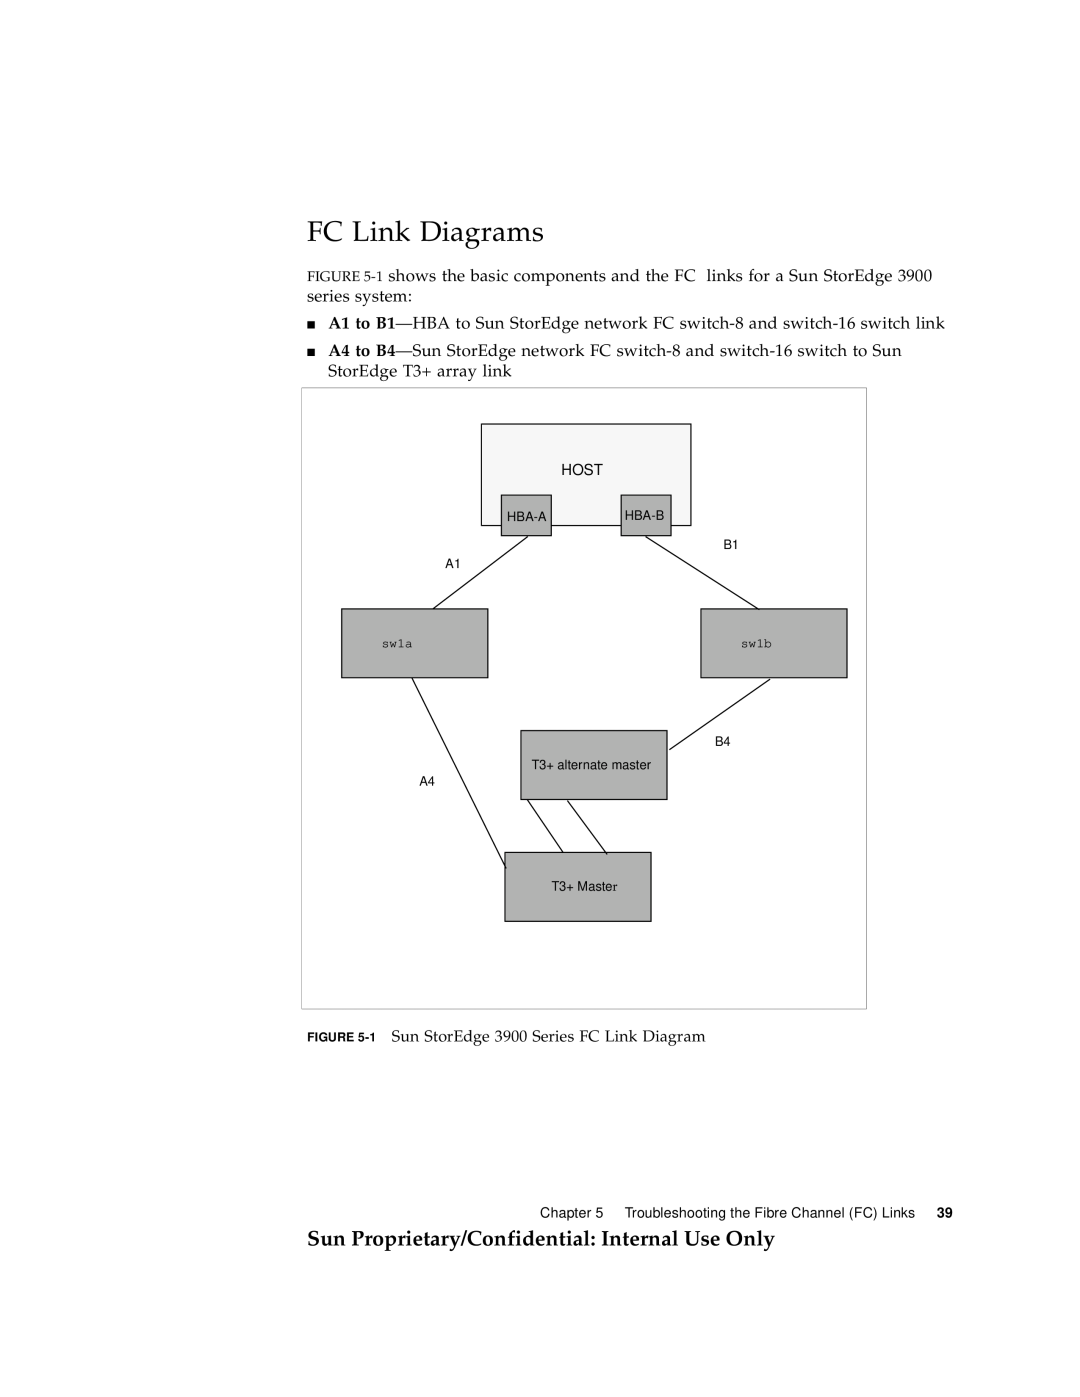 Sun Microsystems 6900, 3900 manual FC Link Diagrams, Sun Proprietary/Confidential Internal Use Only, Host 